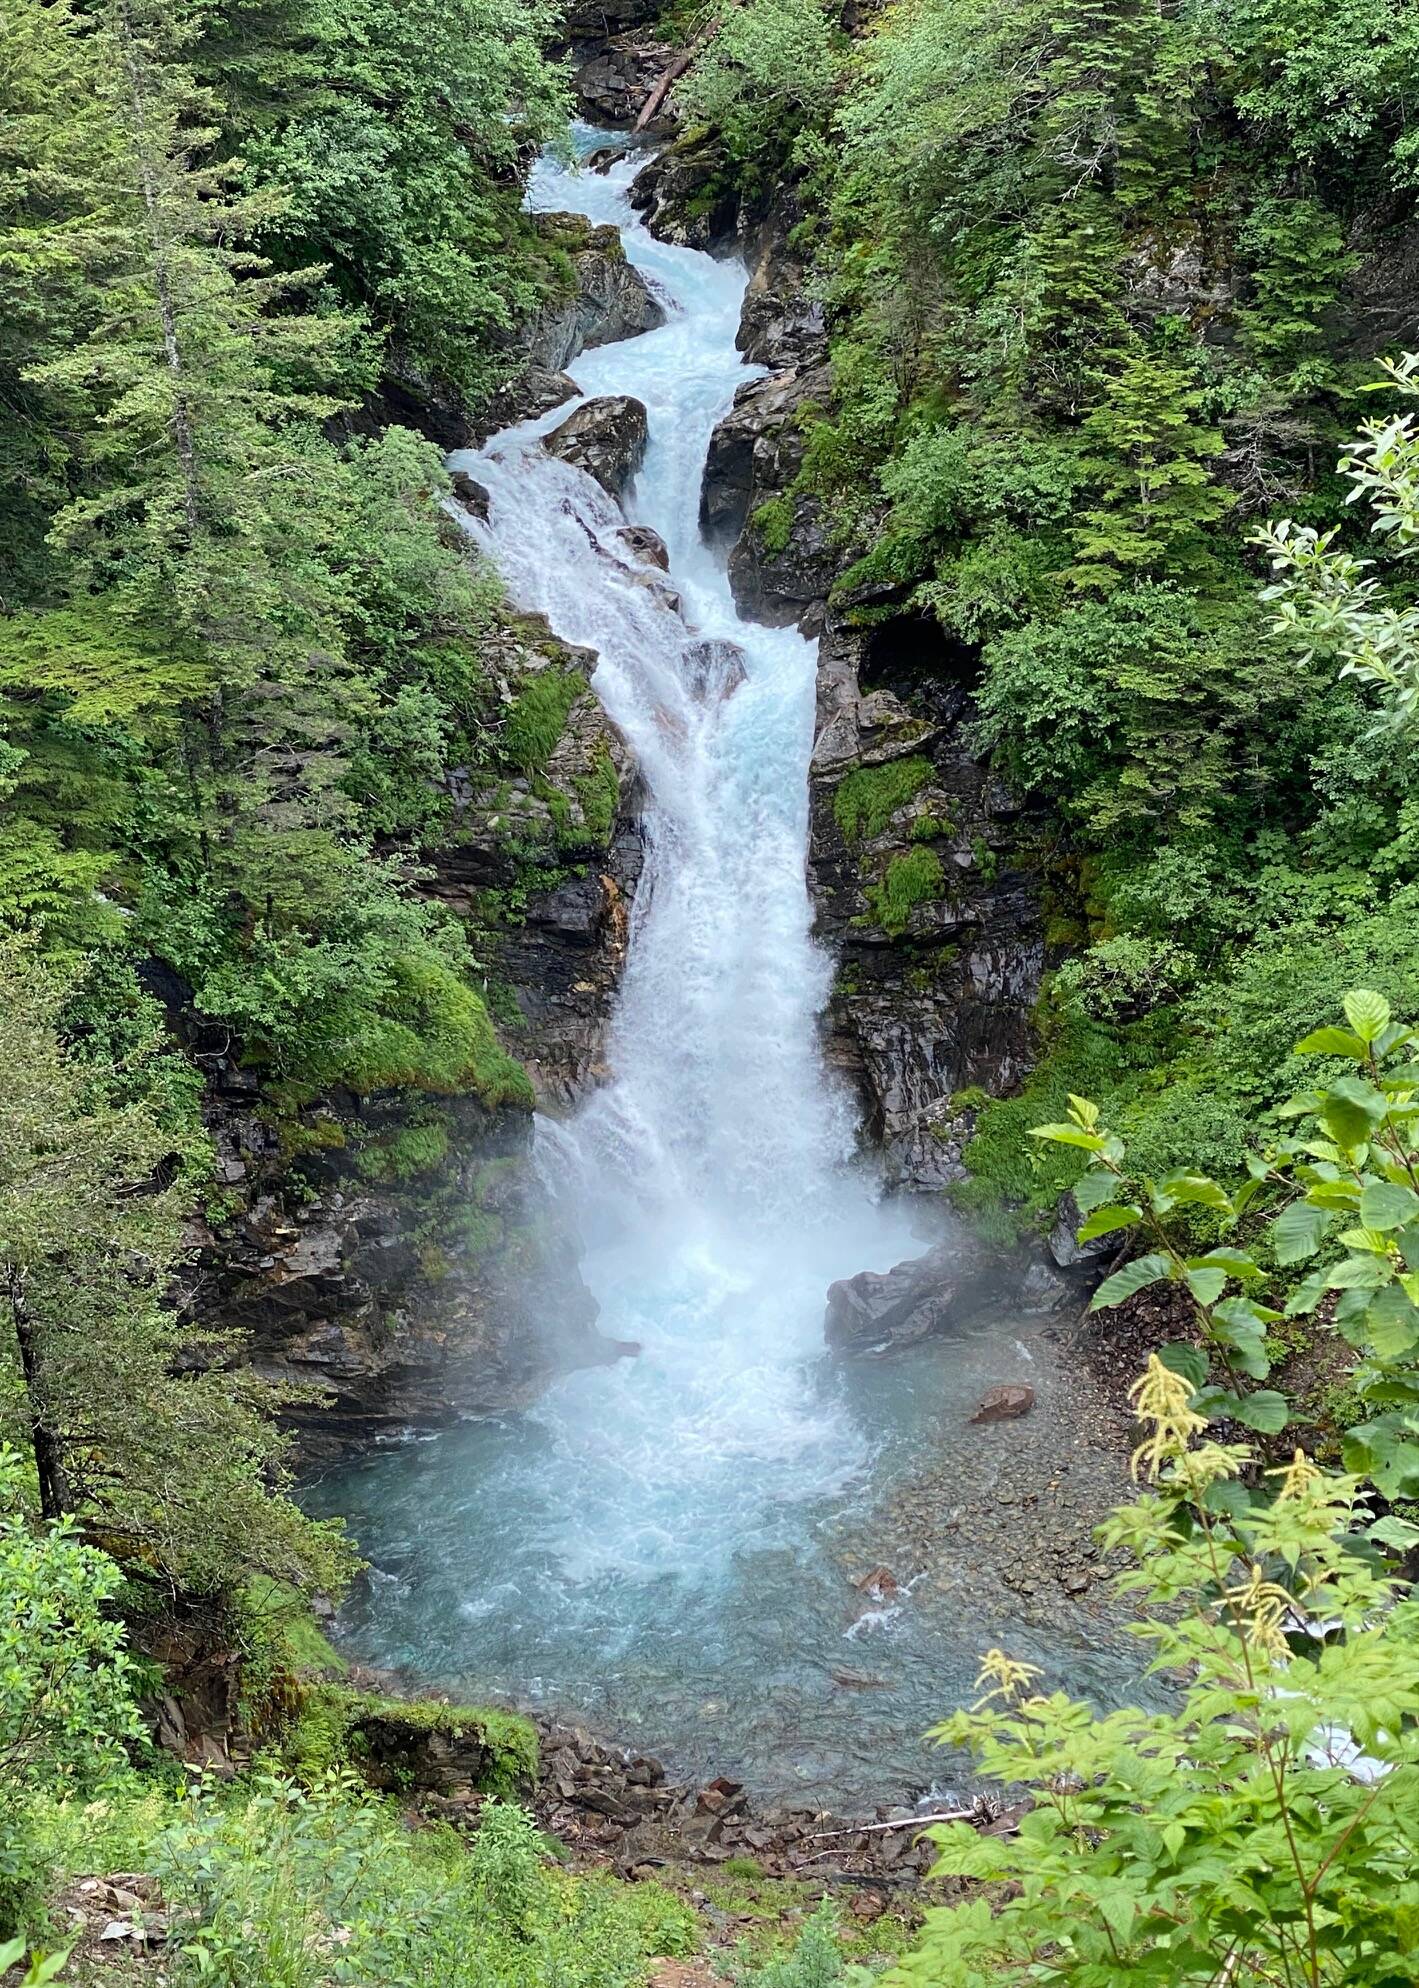 Ebner Falls along Perseverance Trail on July 2. (Photo by Denise Cartoll)